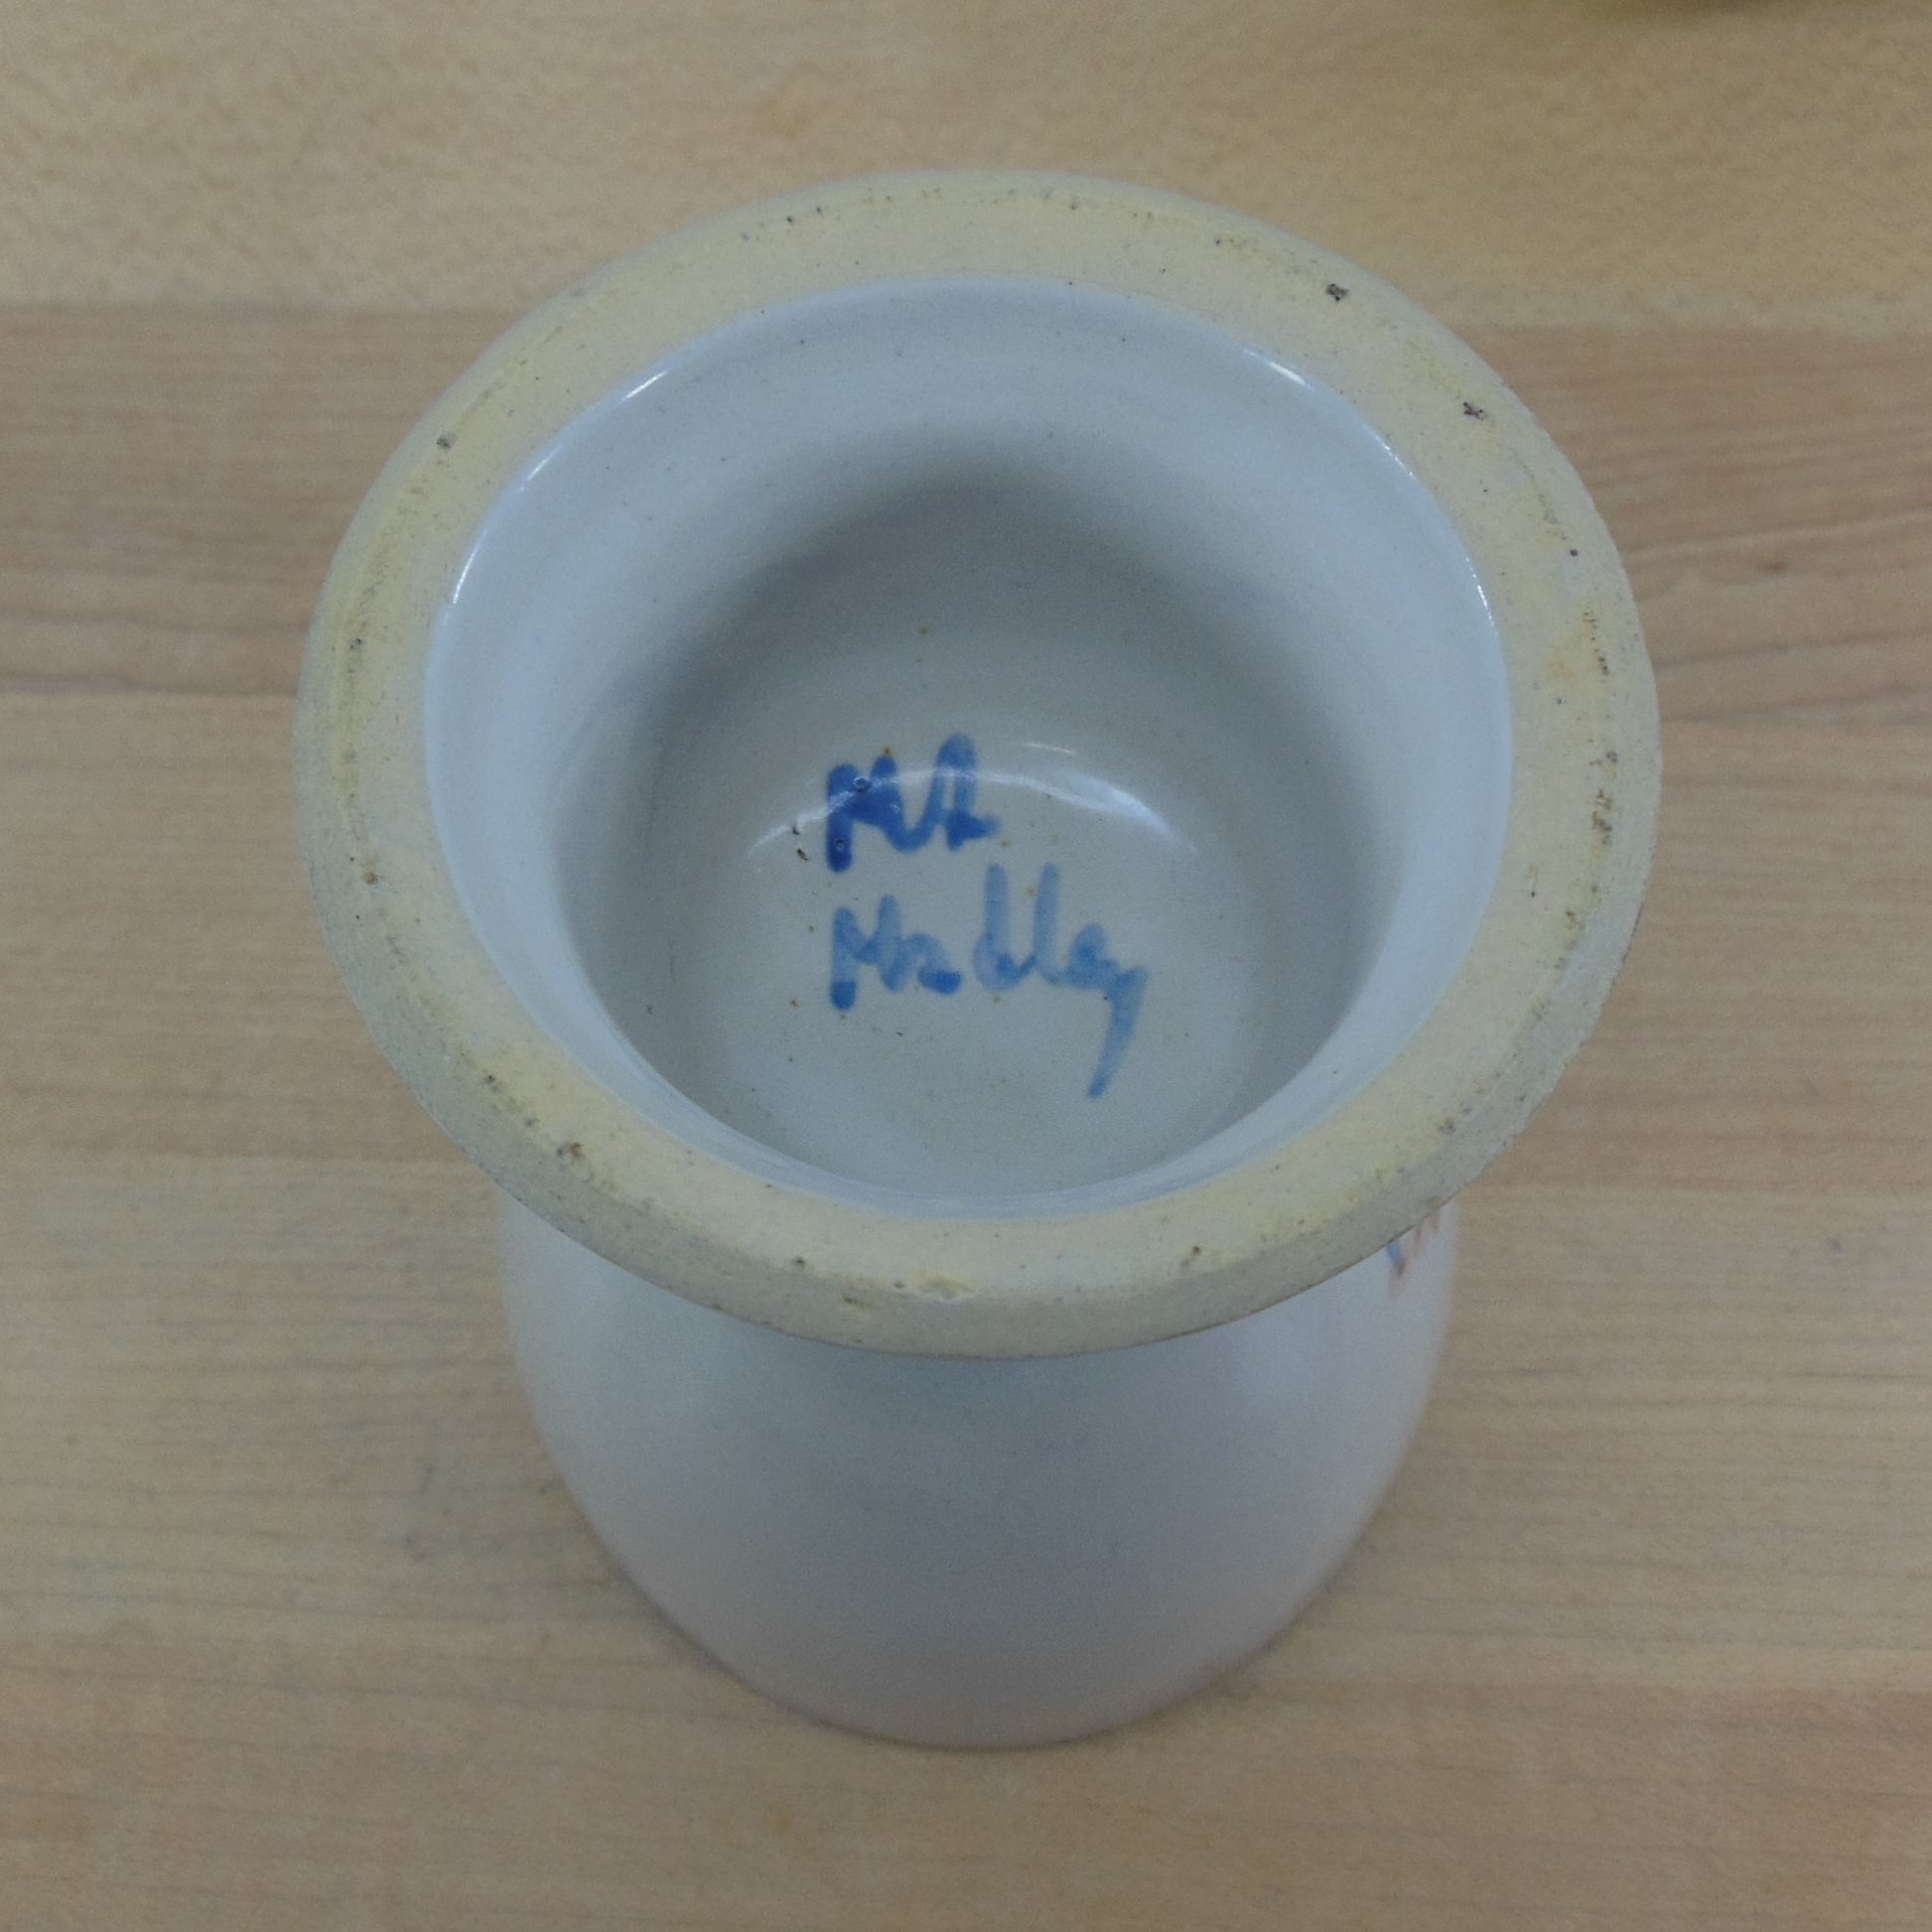 M.A. Hadley Pottery Egg Cup Farm Girl Woman The End Signed